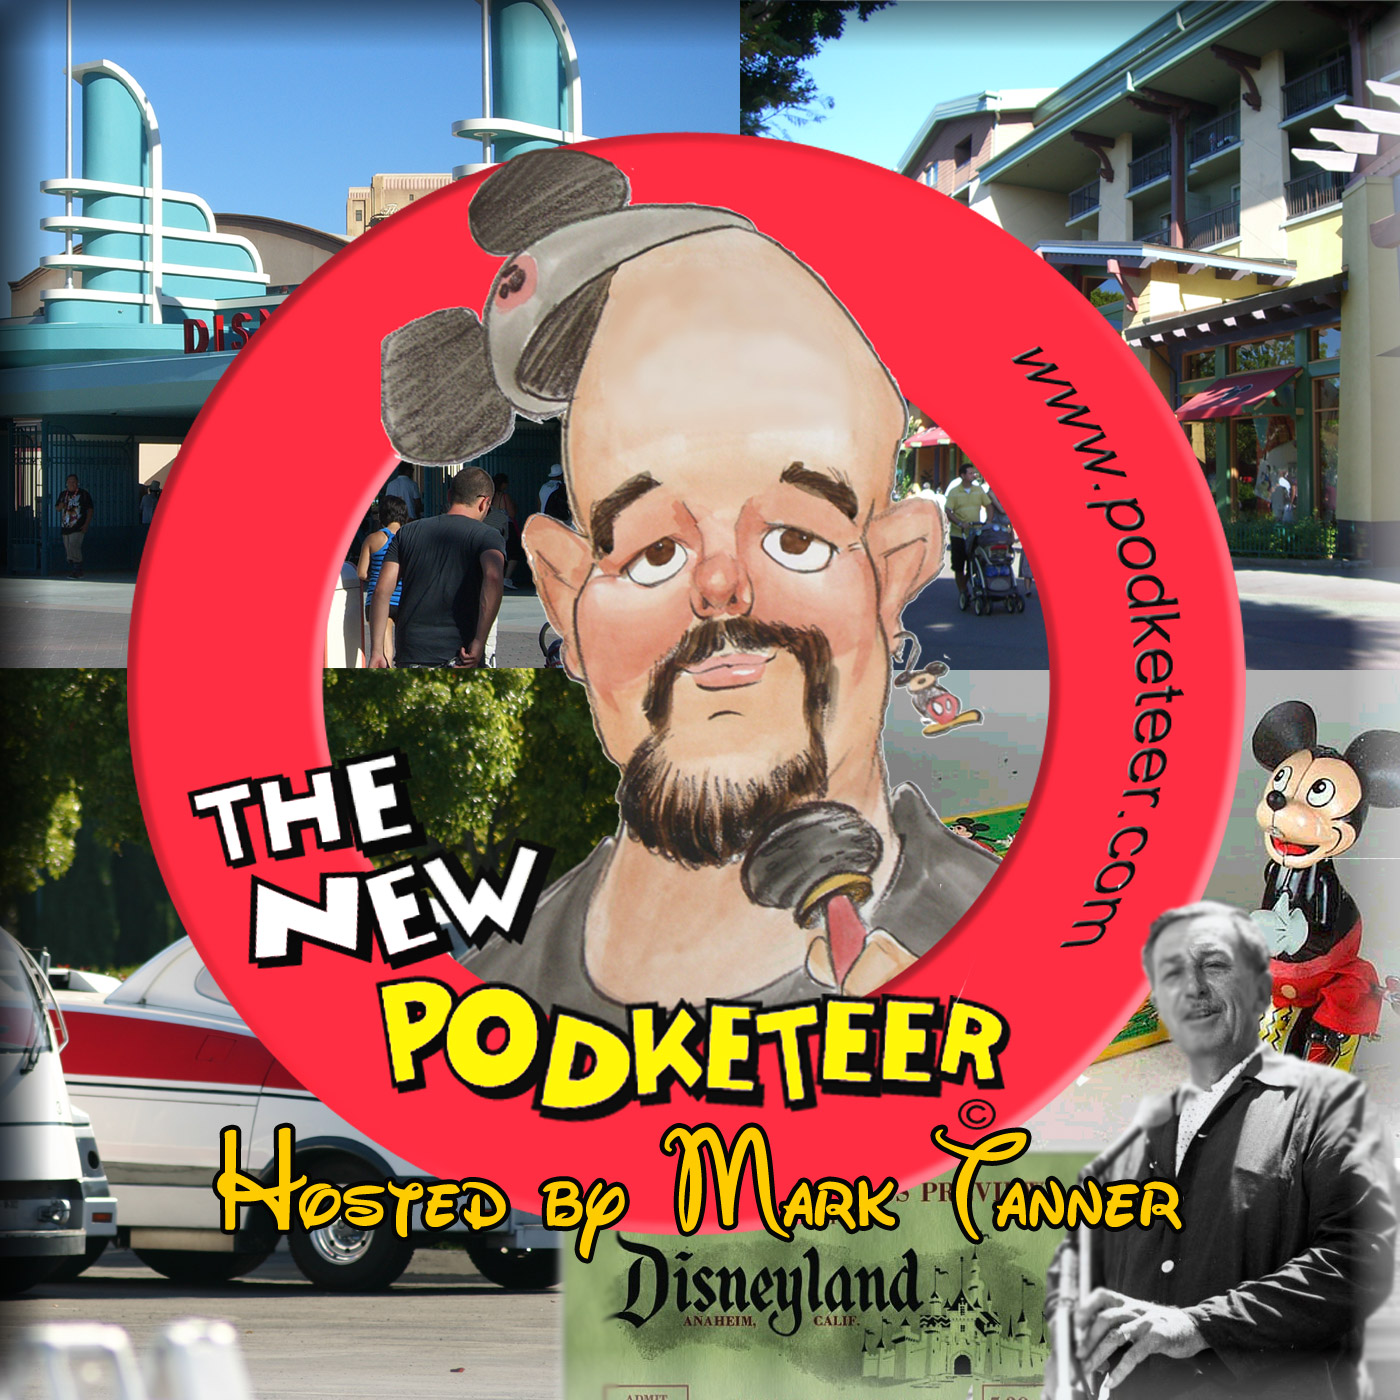 Podketeer Episode - Maudlin and Music